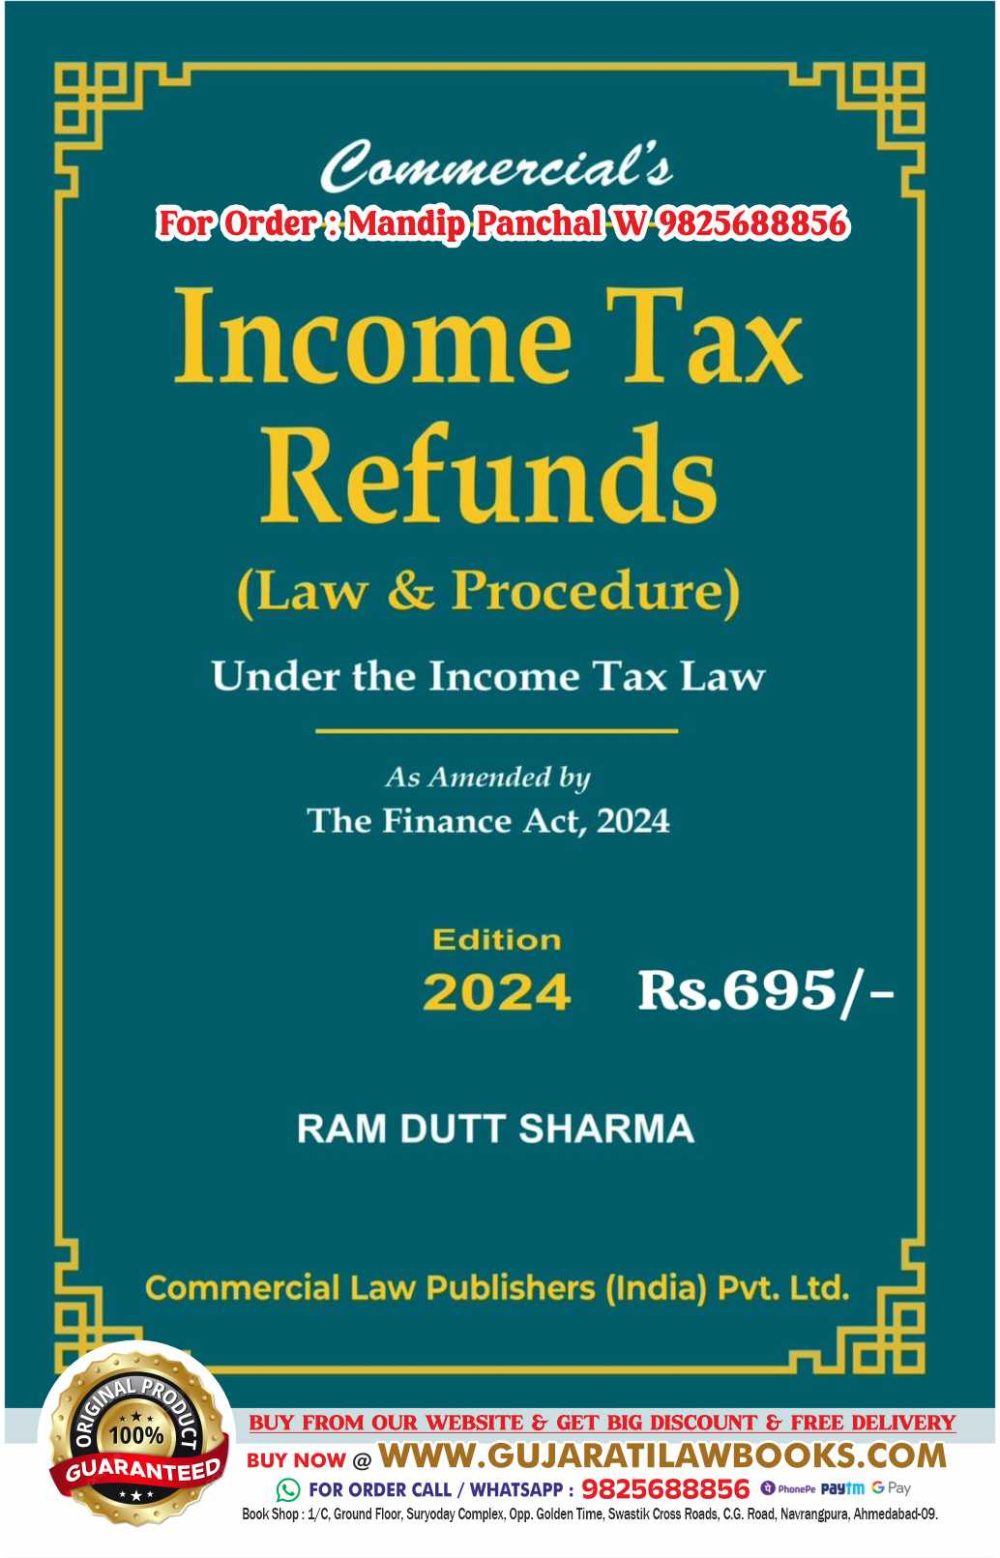 Income Tax Refunds (Law & Procedure) by Ram Dutt Sharma - Latest April 2024 Edition Commercial